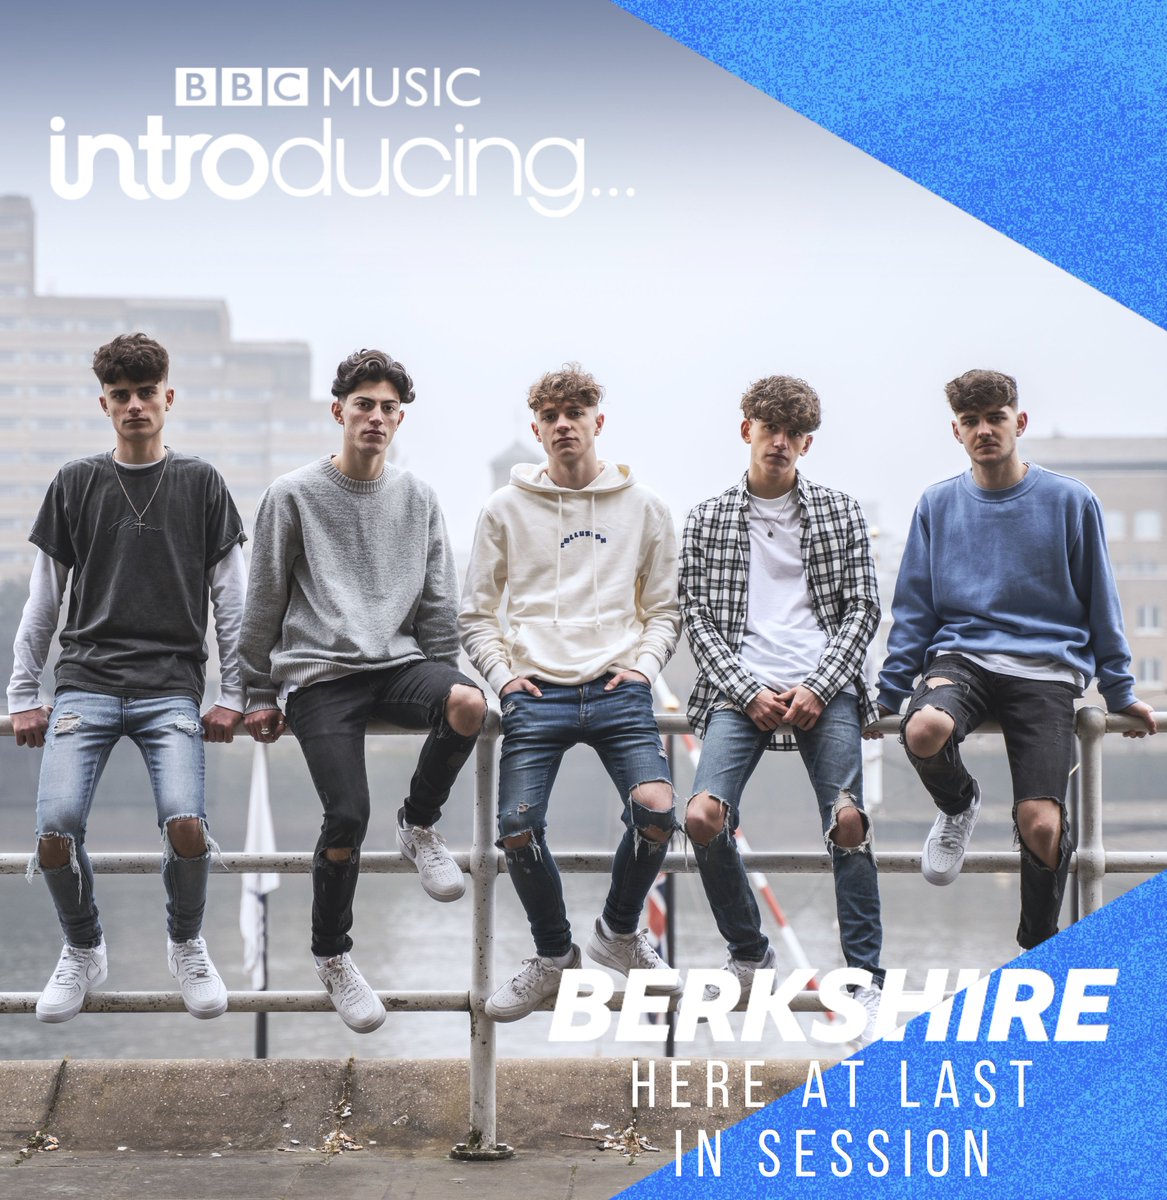 Coming up this week on @bbcintroducing/@BBCBerkshire with @agwestie from 8PM 👀New Tunes from @cortescomusic, @cecilmusicuk and Vi Mere 🍺Speaking with @Readipop about At The Brewery Festival 🎸@hereatlastband In Session 👄@Bethiamusic x @empmort Track of the Week!